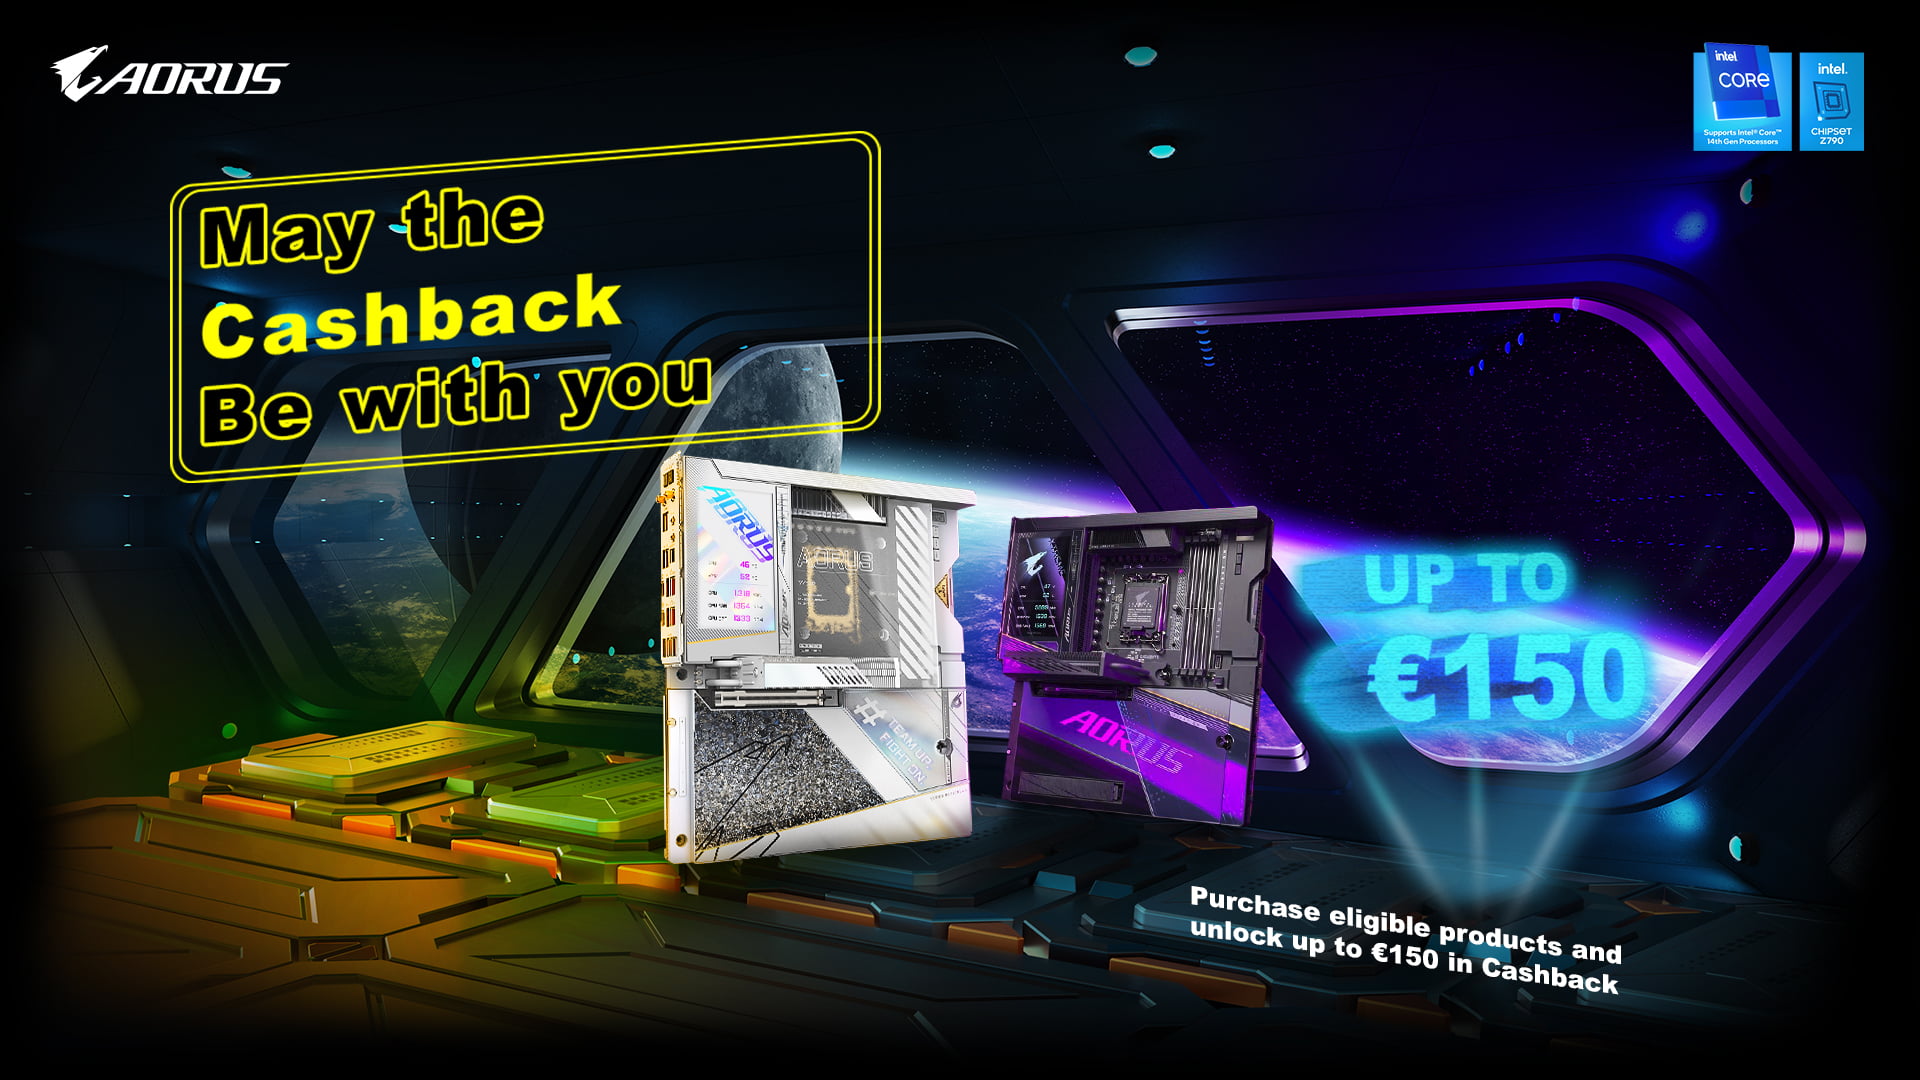 May the Cashback Be with you! Purchase eligible products and unlock up to €150 in Cashback